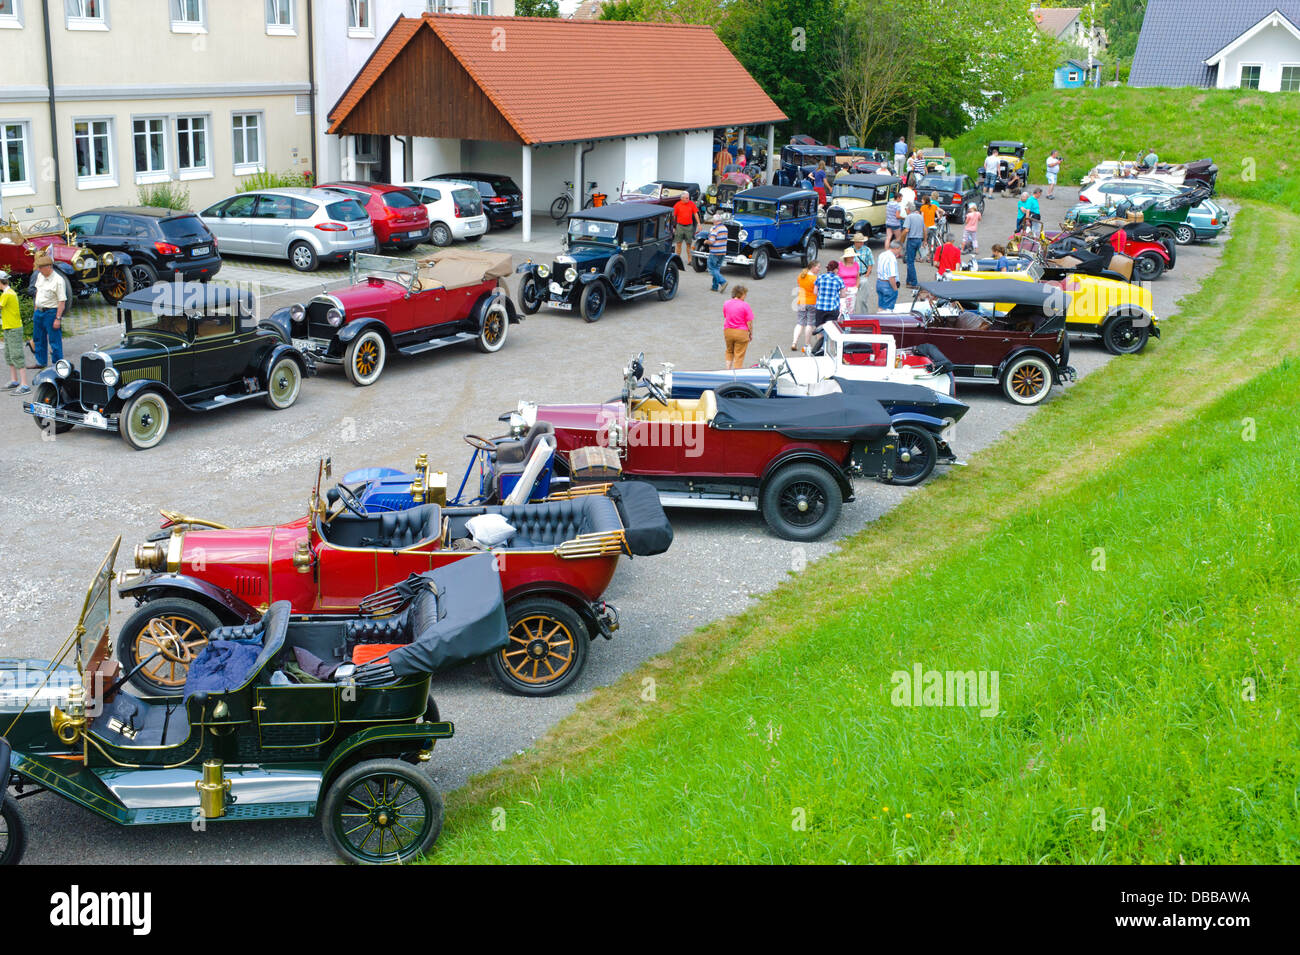 Oldtimer rally for at least 80 years old antique cars Stock Photo